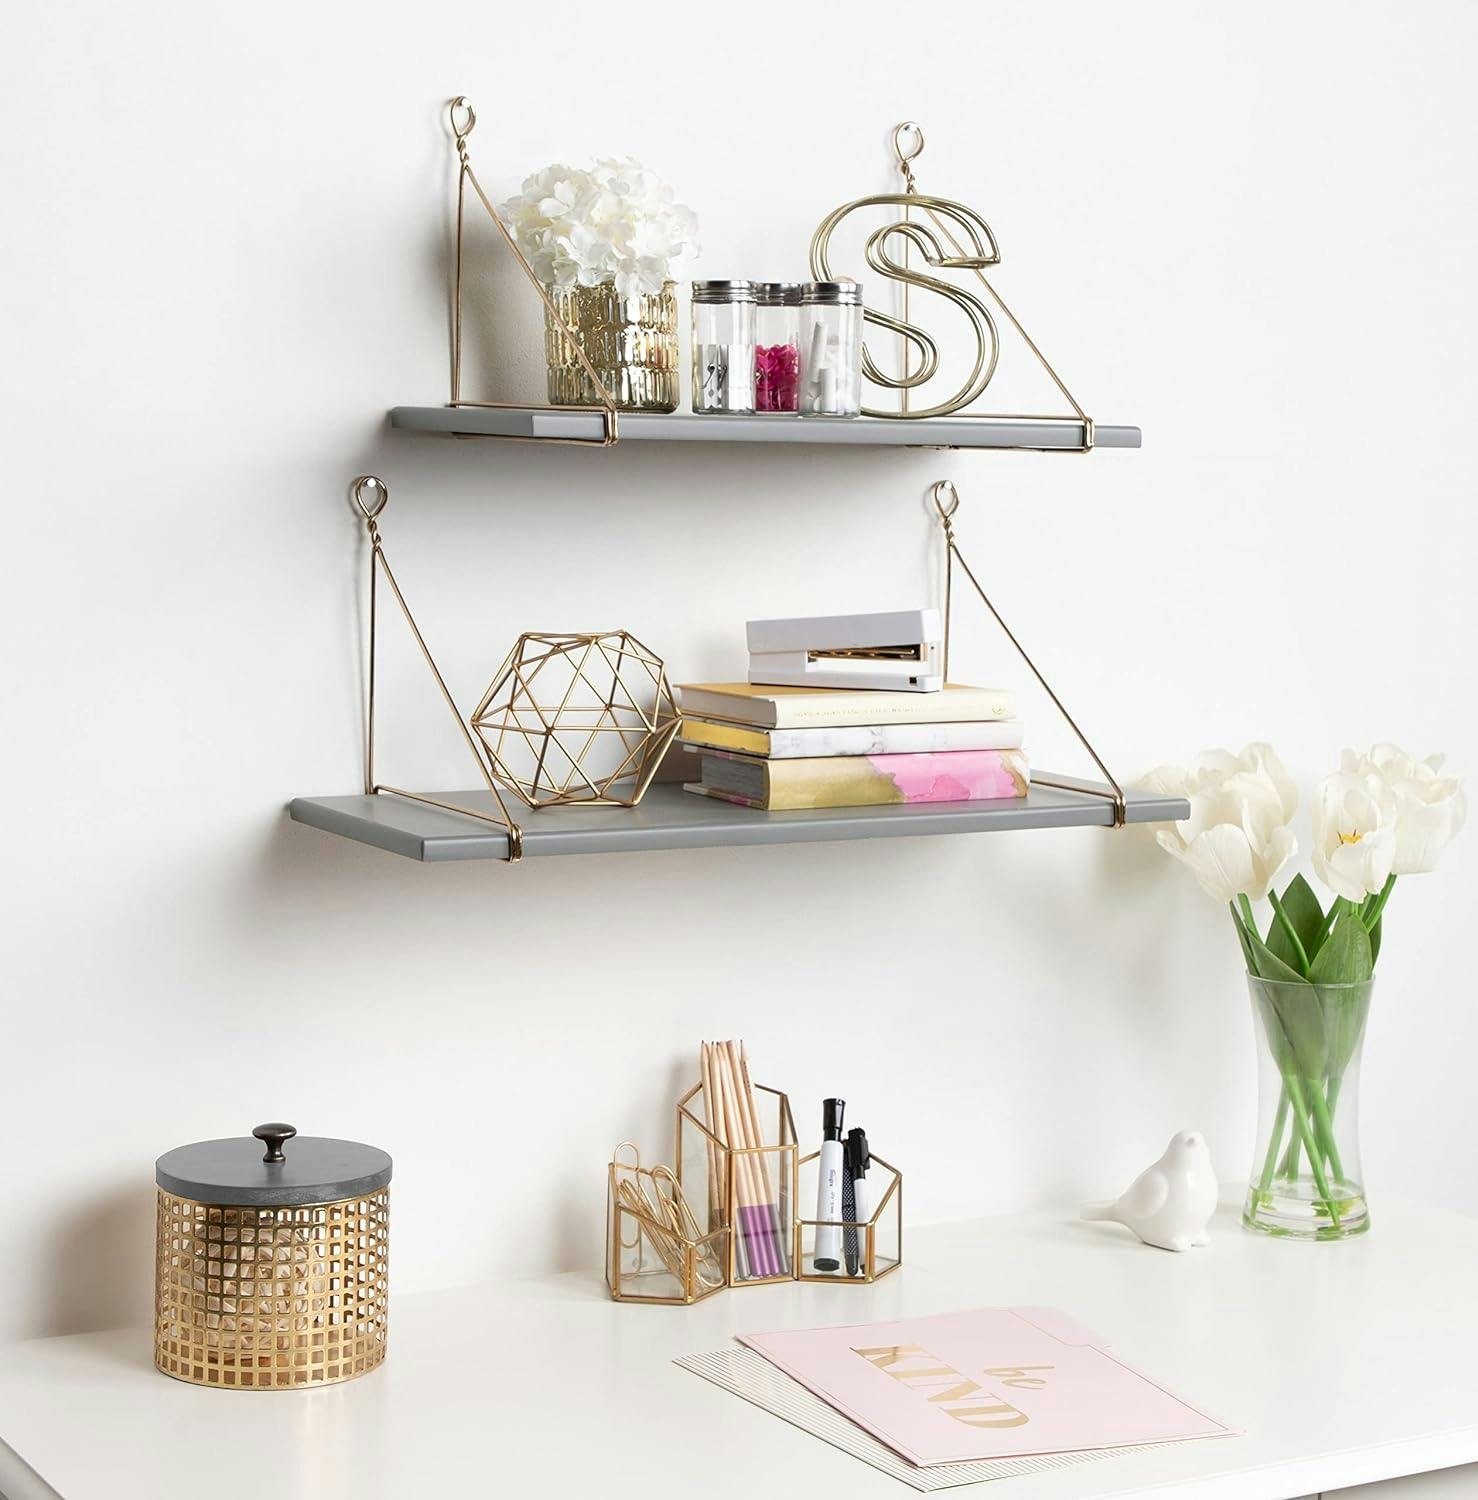 Vista Gray and Gold Wood and Metal Bracket Wall Shelves, 2-Piece Set